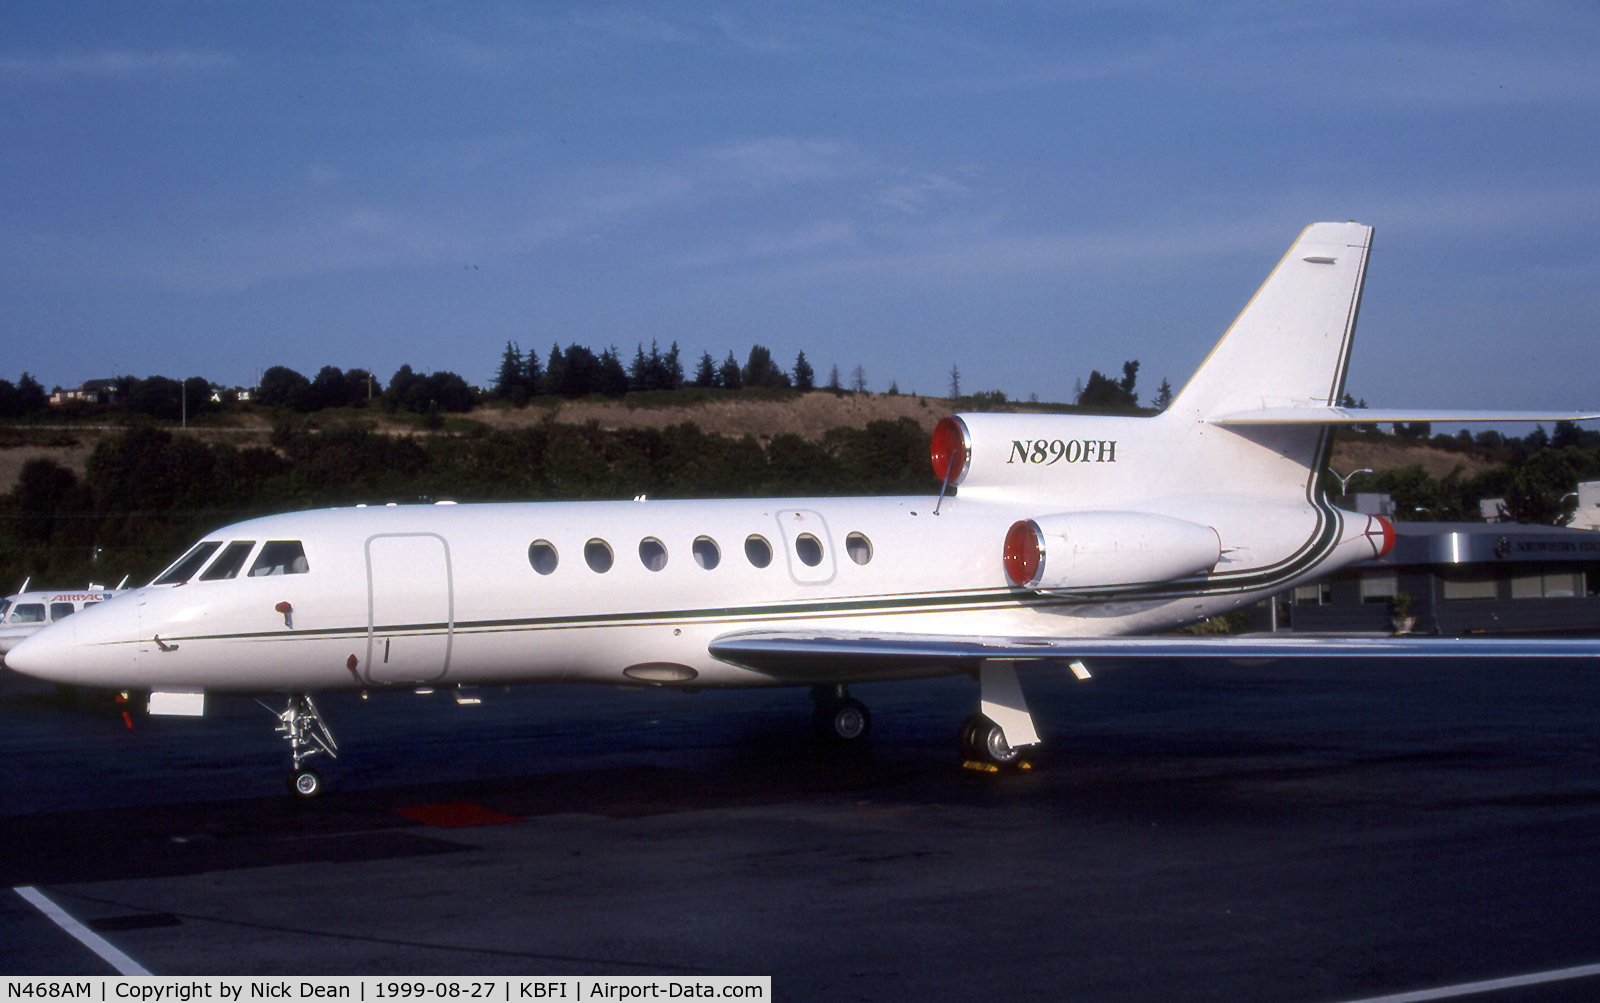 N468AM, 1981 Dassault-Breguet Falcon 50 C/N 31, Seen here as N890FH this airframe is currently registered N468AM as posted